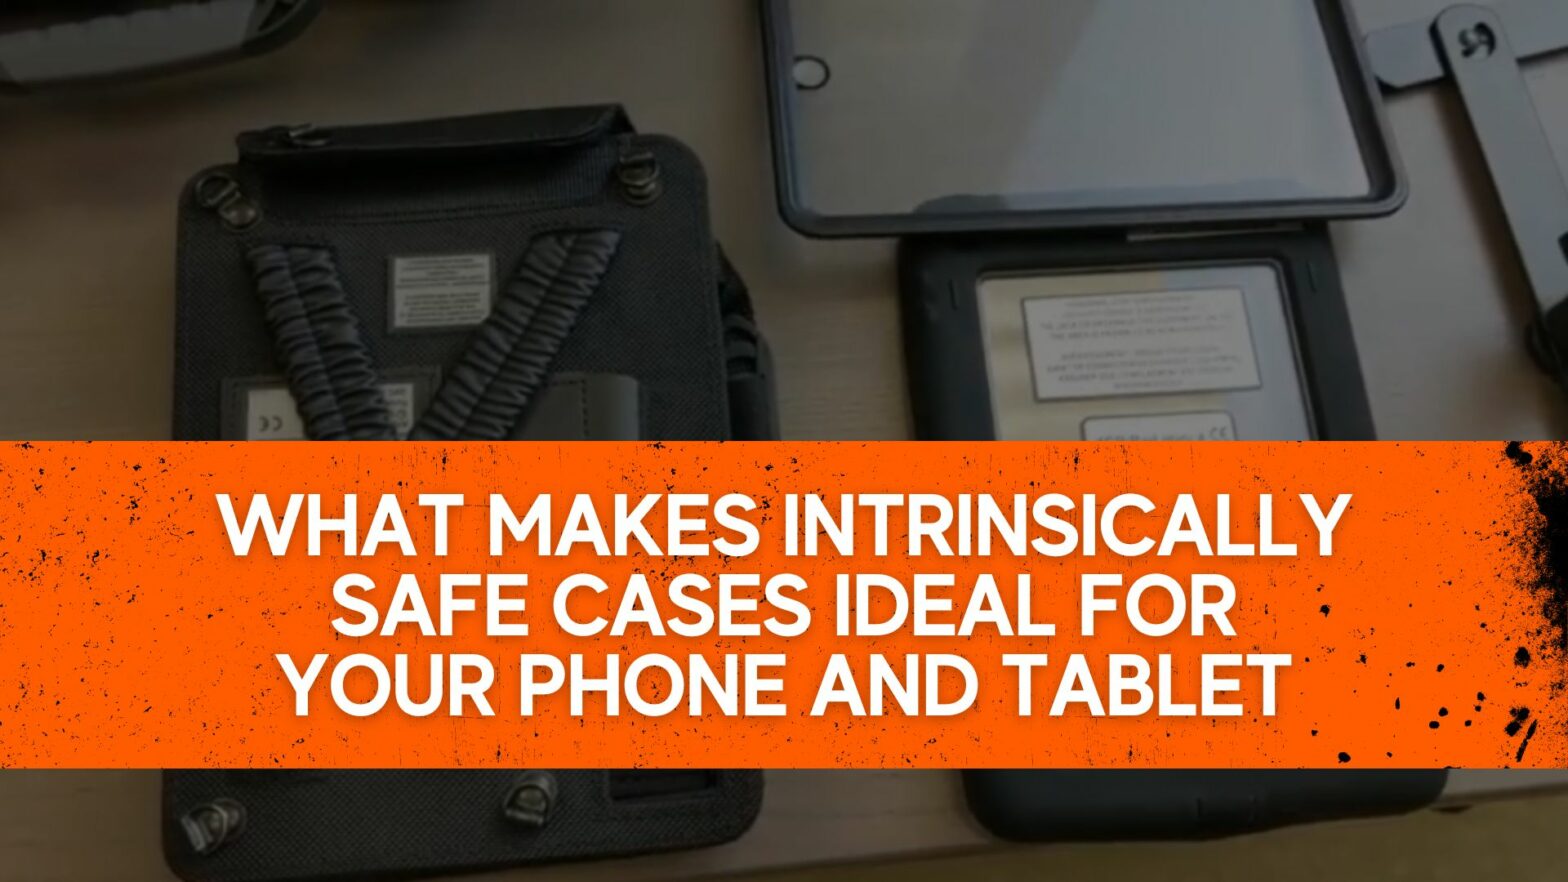 What Makes Intrinsically Safe Cases Ideal for your Phone and Tablet